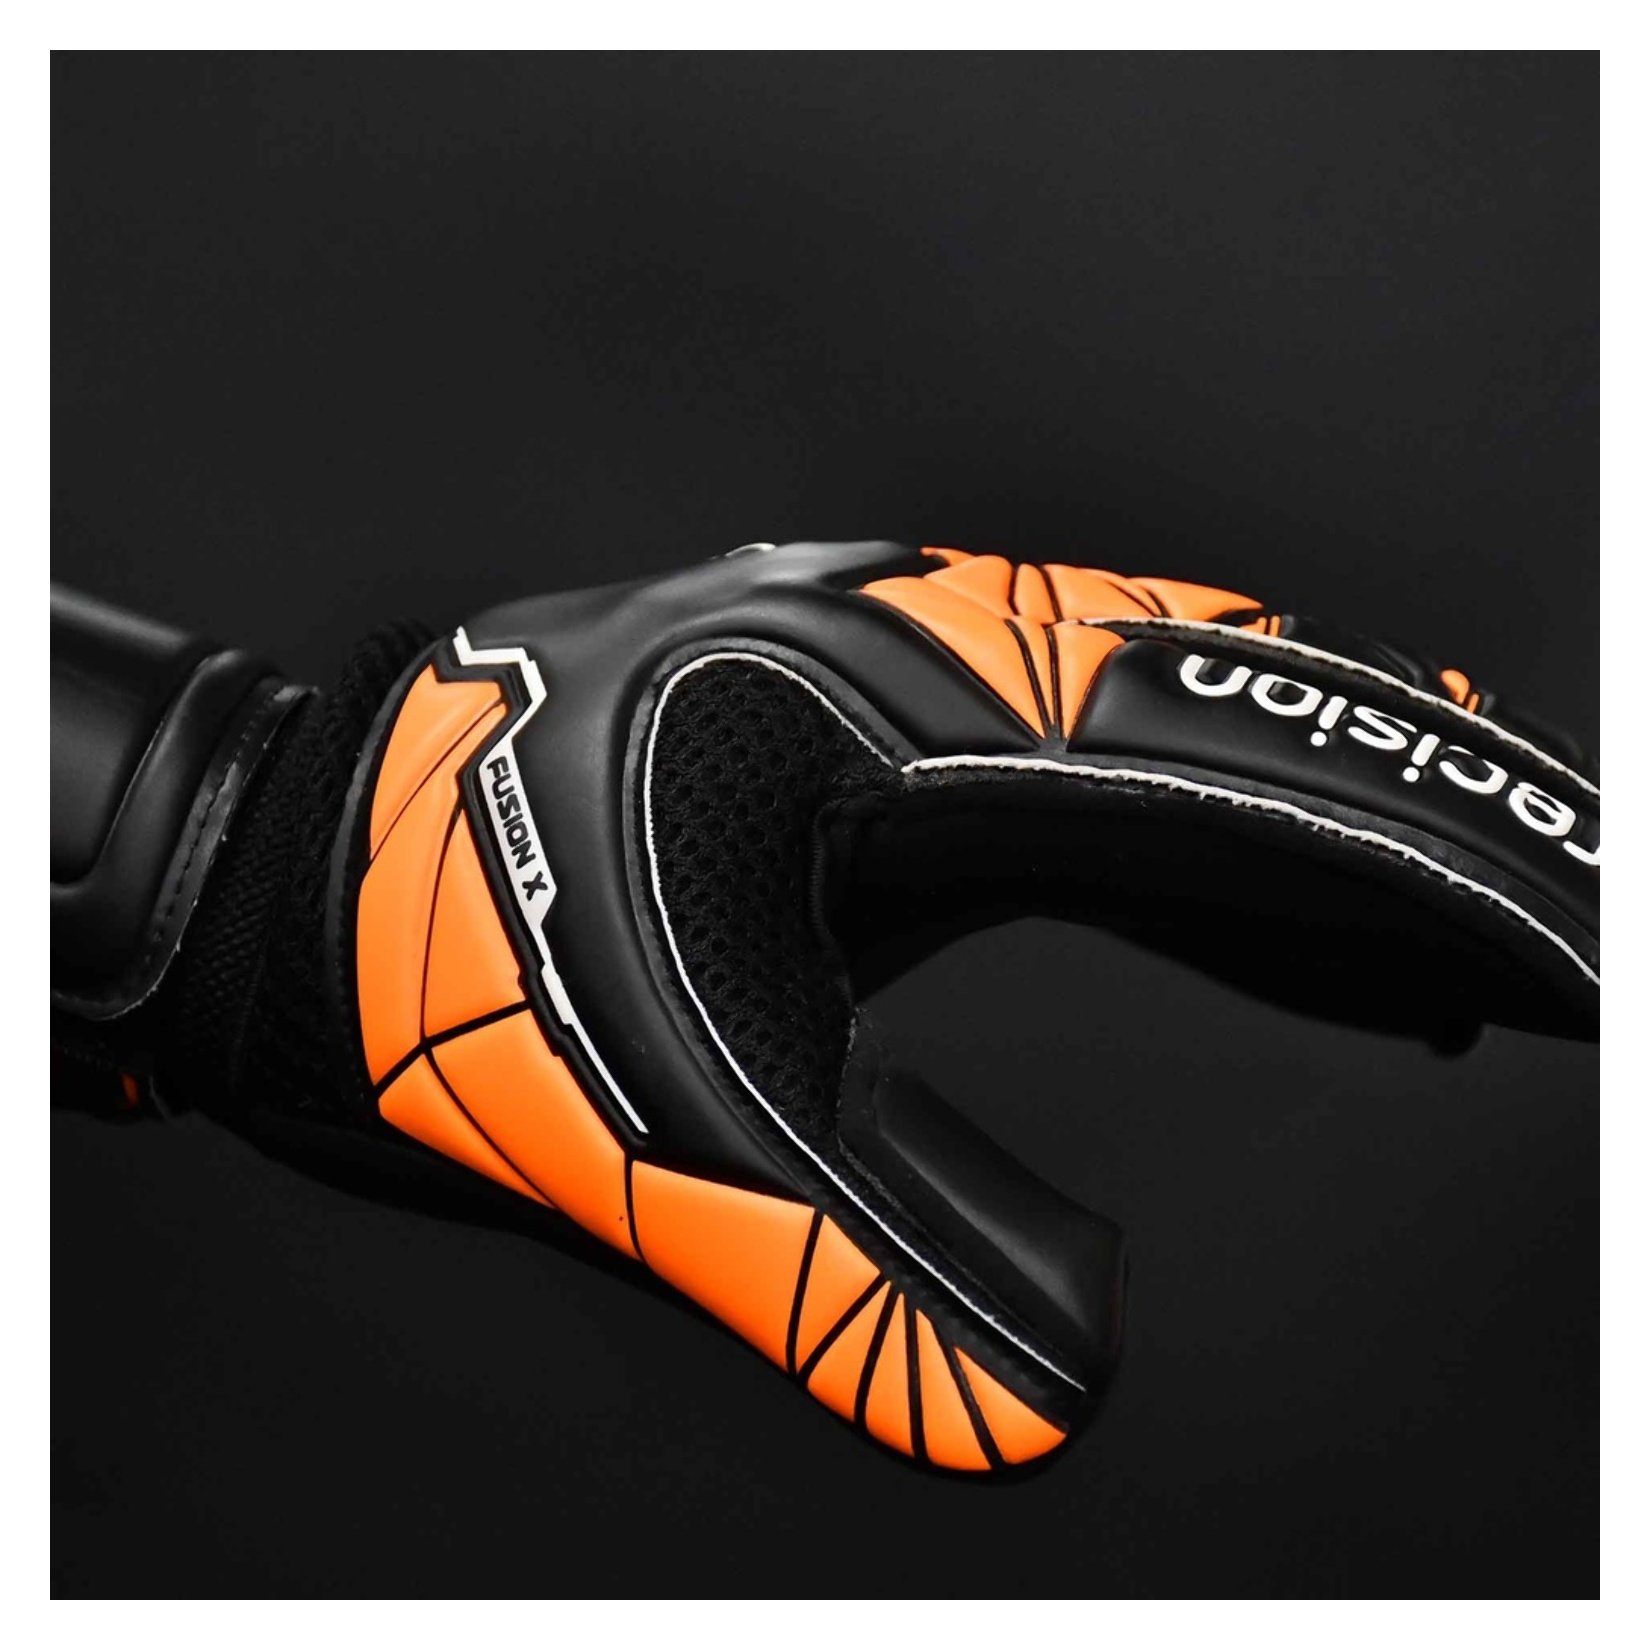 Precision Fusion X Roll Finger Protect GK Gloves